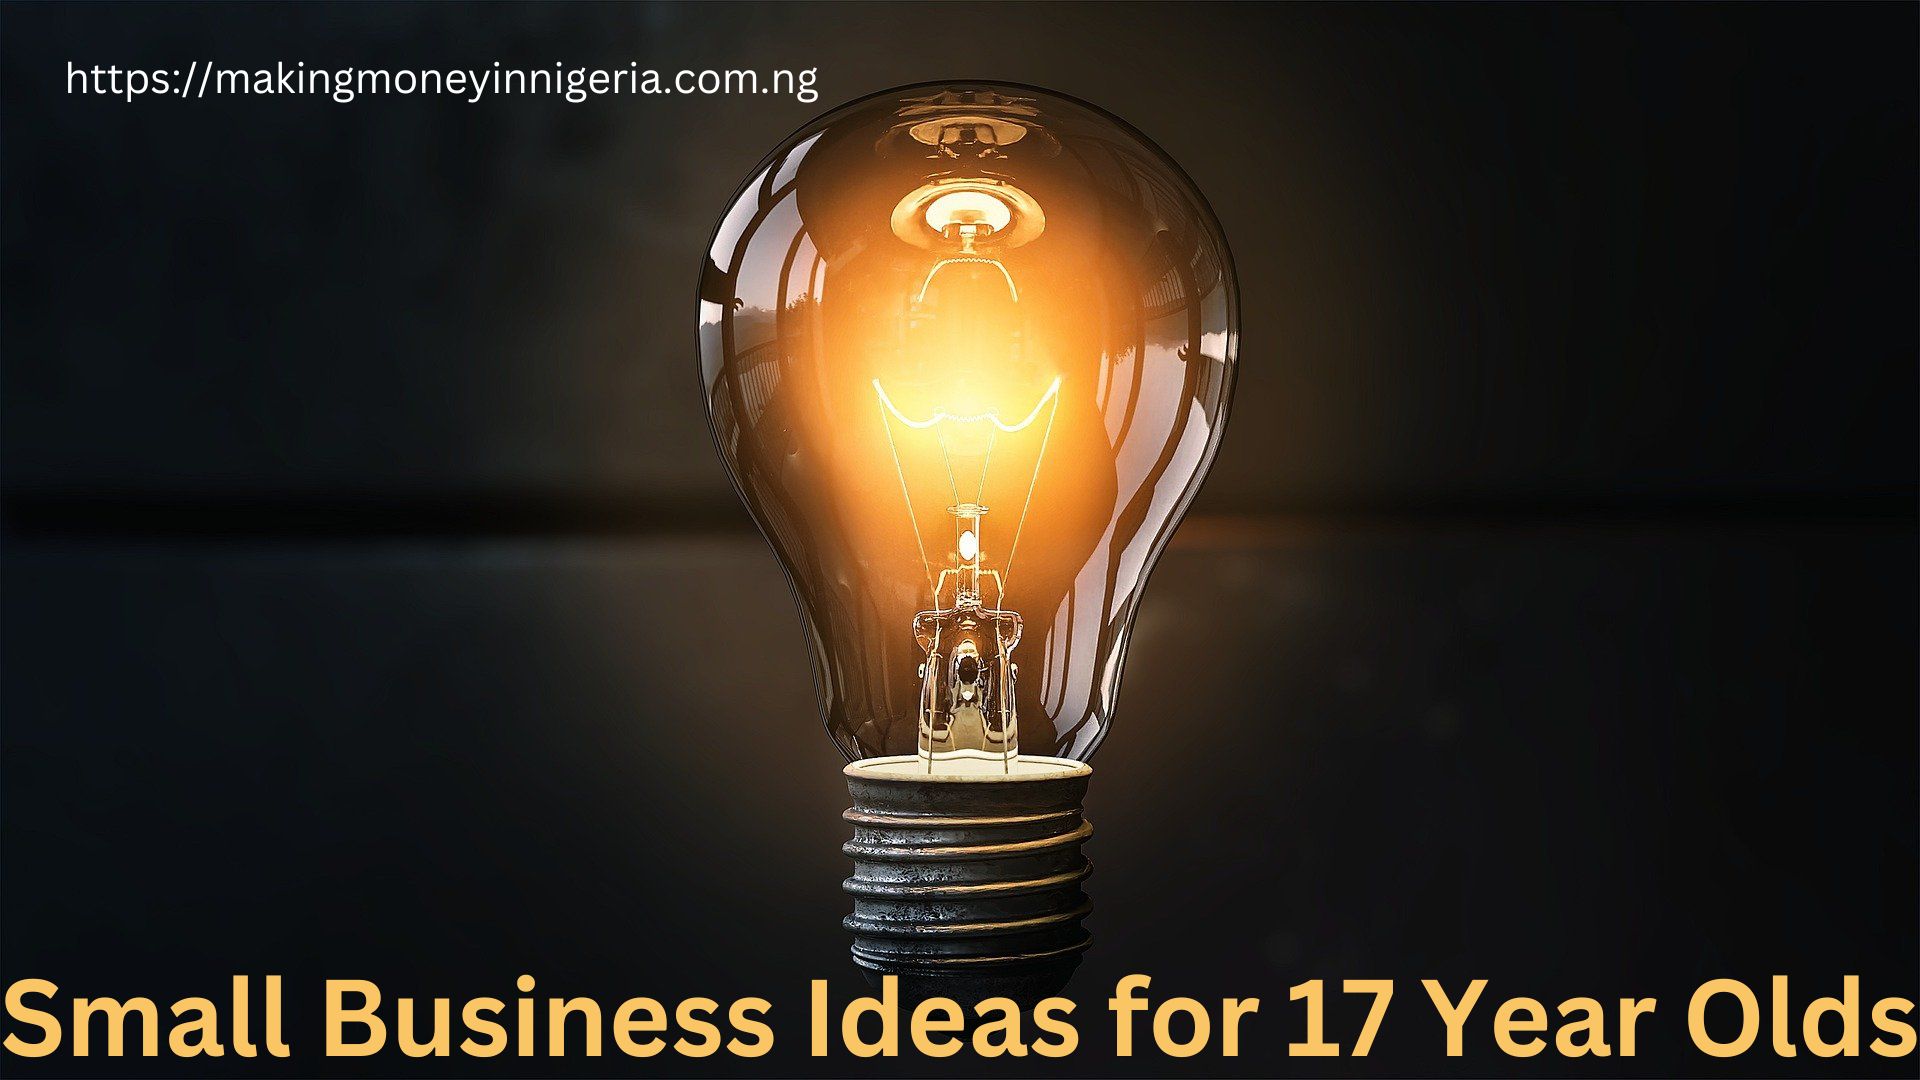 10 Perfect Small Business Ideas for 17 Year Olds in Nigeria